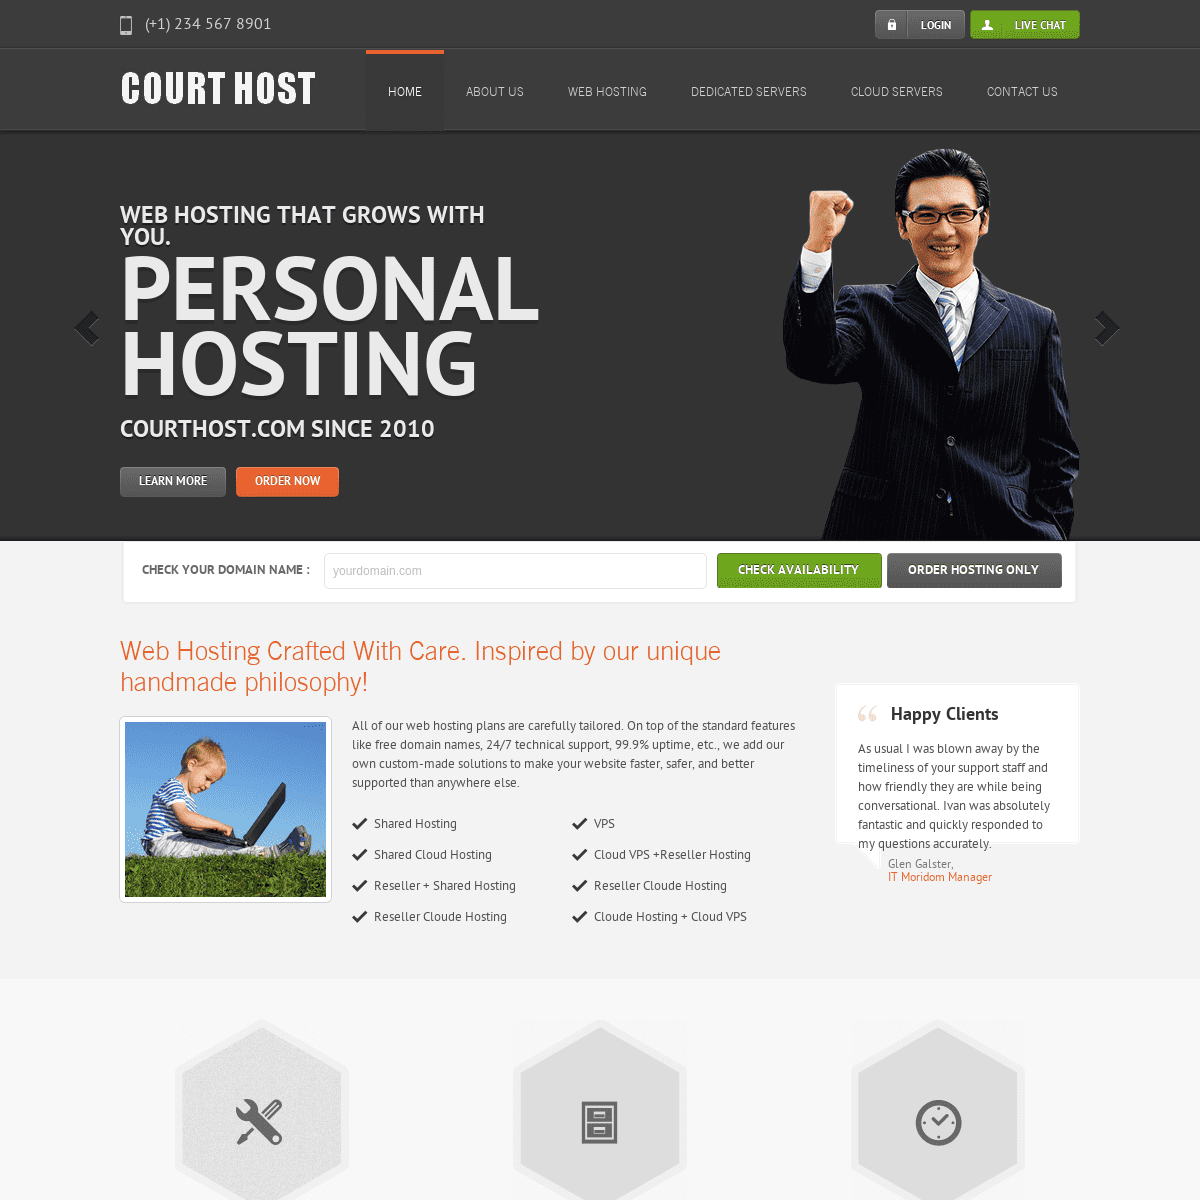 A complete backup of courthost.com